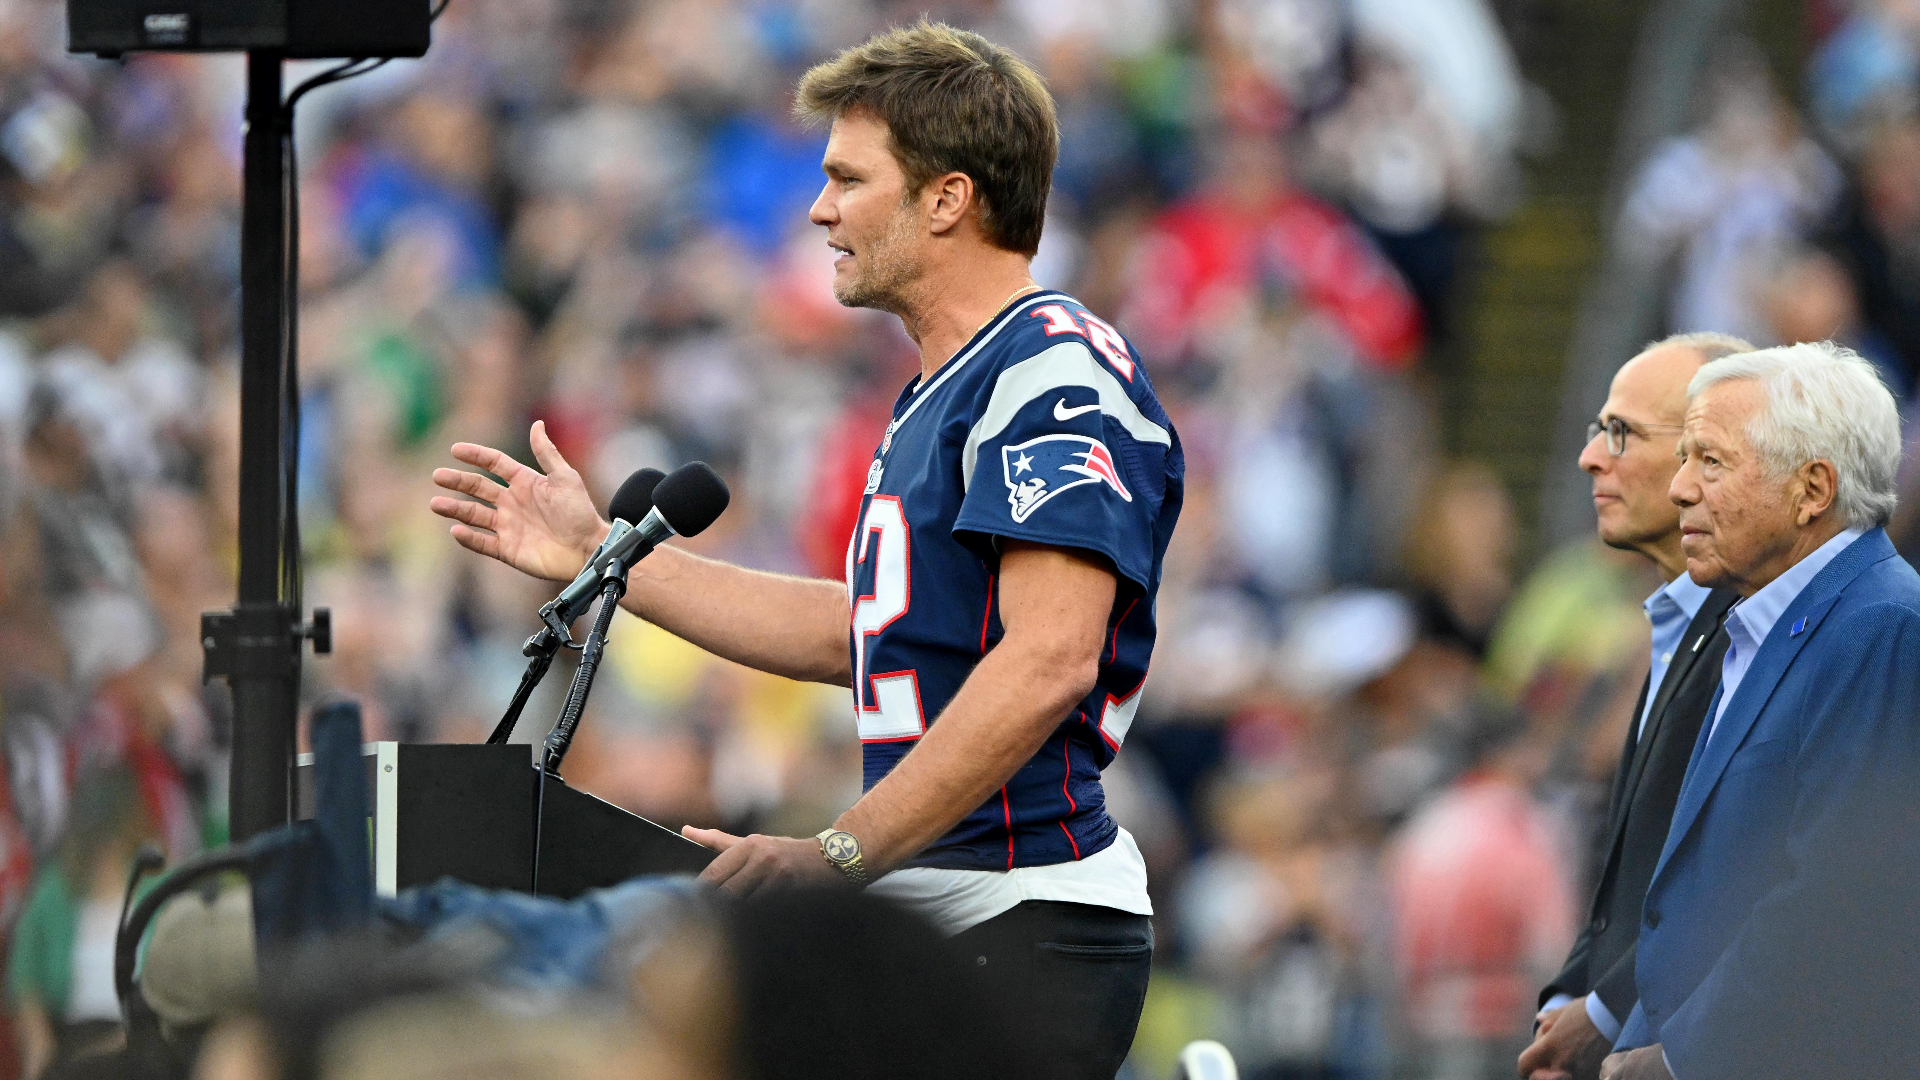 Could Tom Brady Return, Play For Jets? Patriots Legend Weighs In